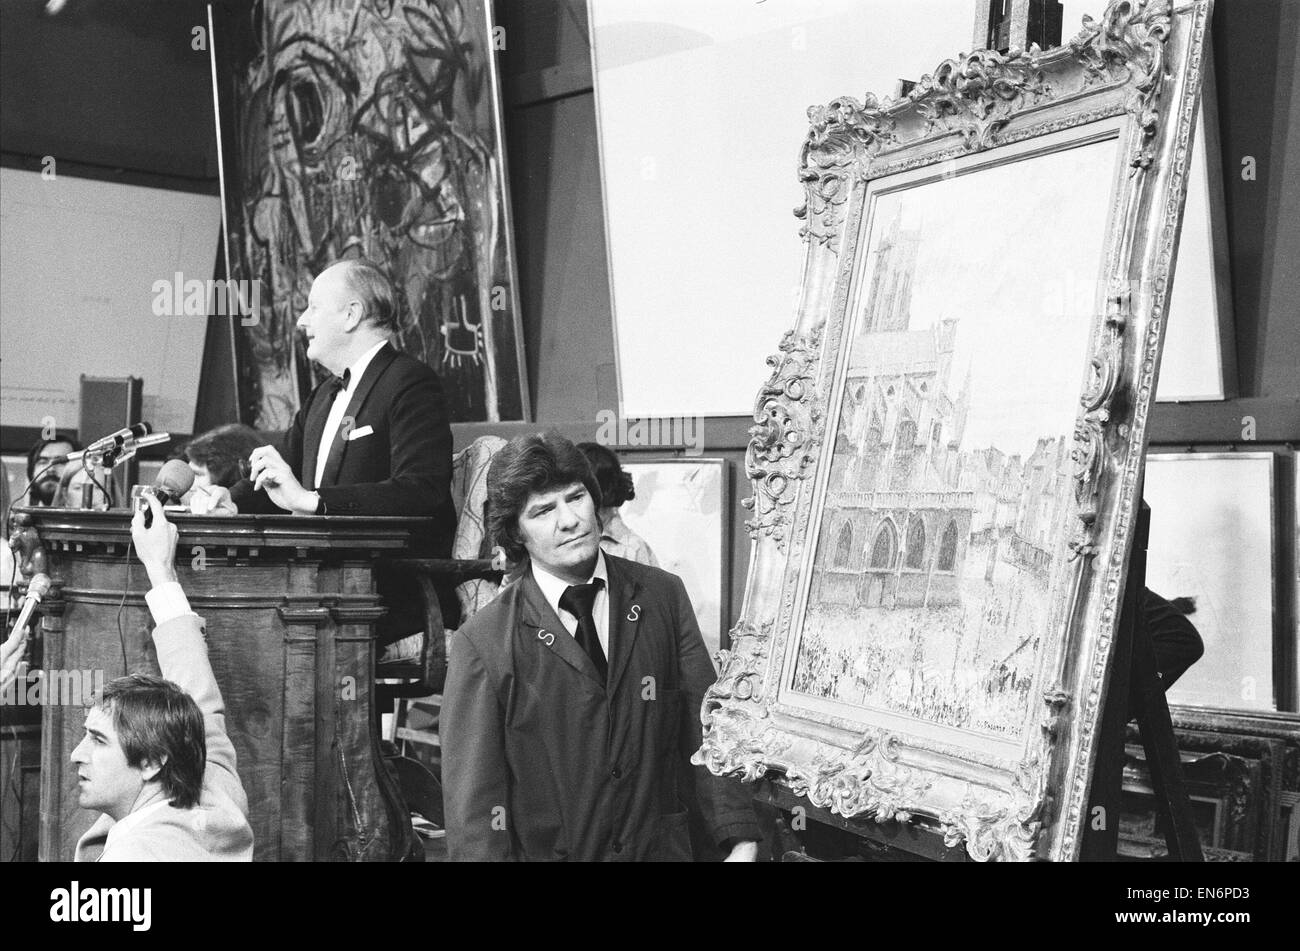 Sale of some of Frank Sinatra's paintings at Sotheby's in London 27 June 1977 Stock Photo